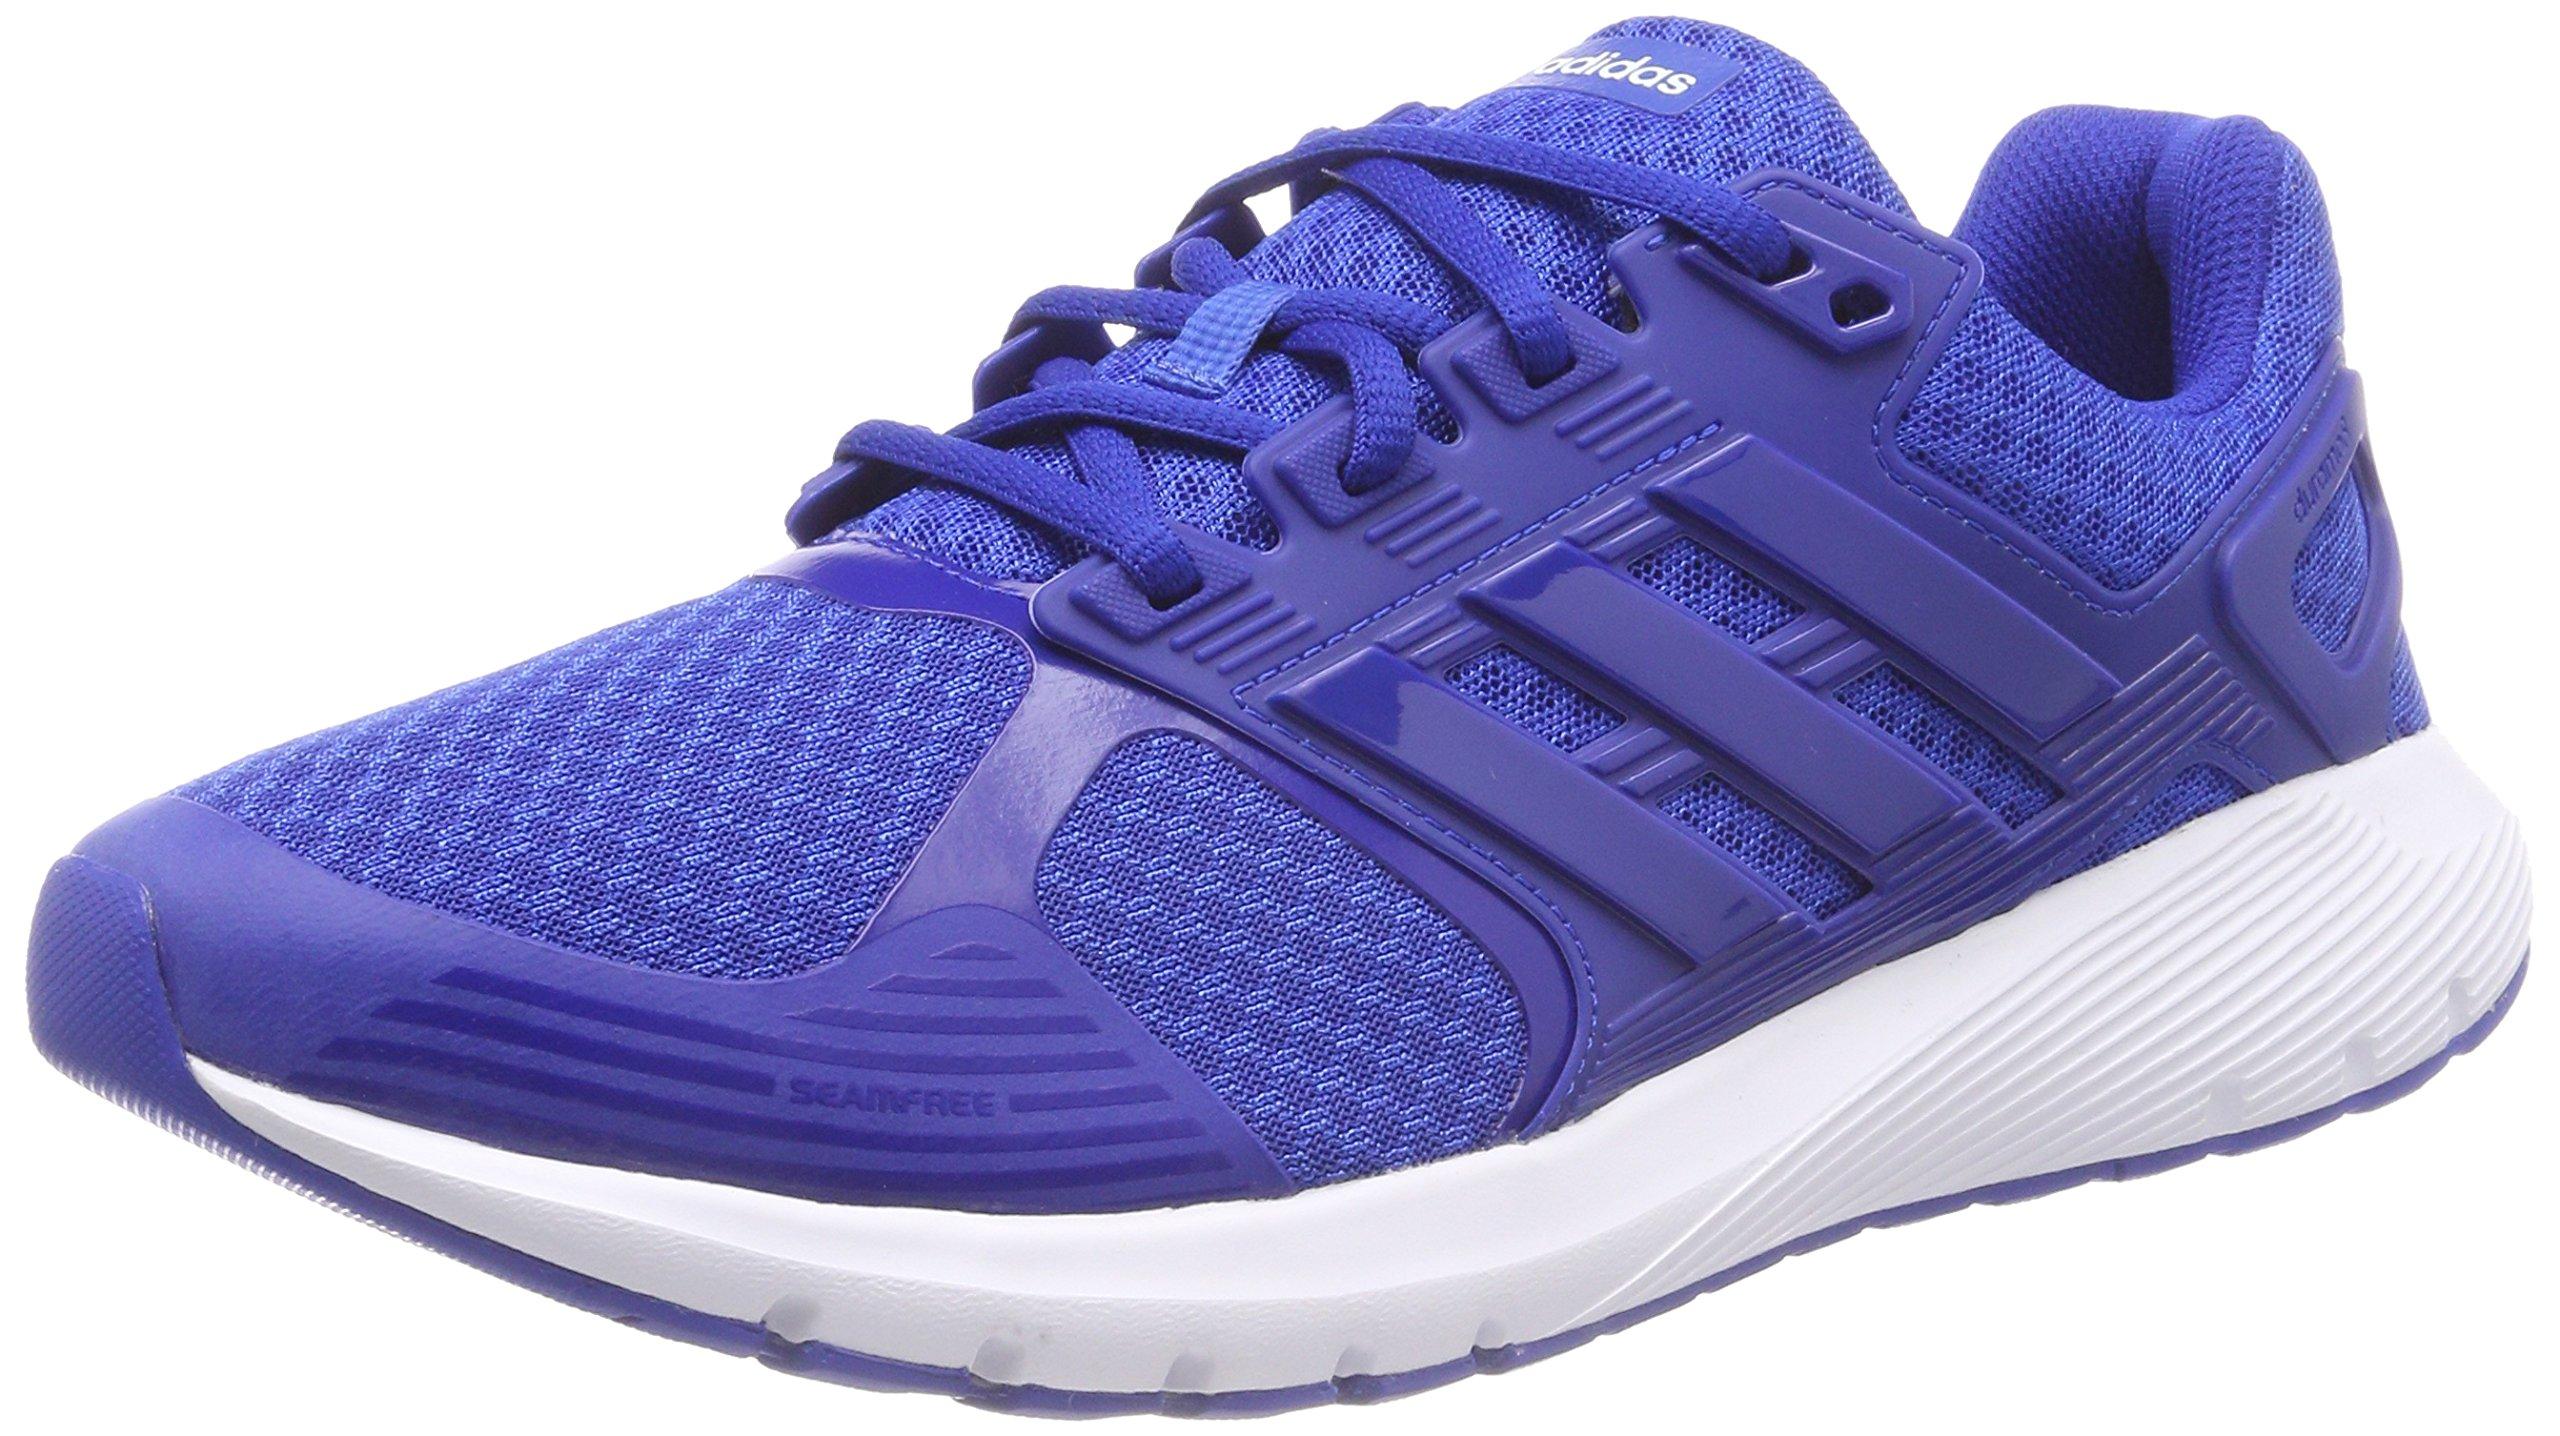 adidas Duramo 8 M Running Shoes in Blue for Men - Lyst